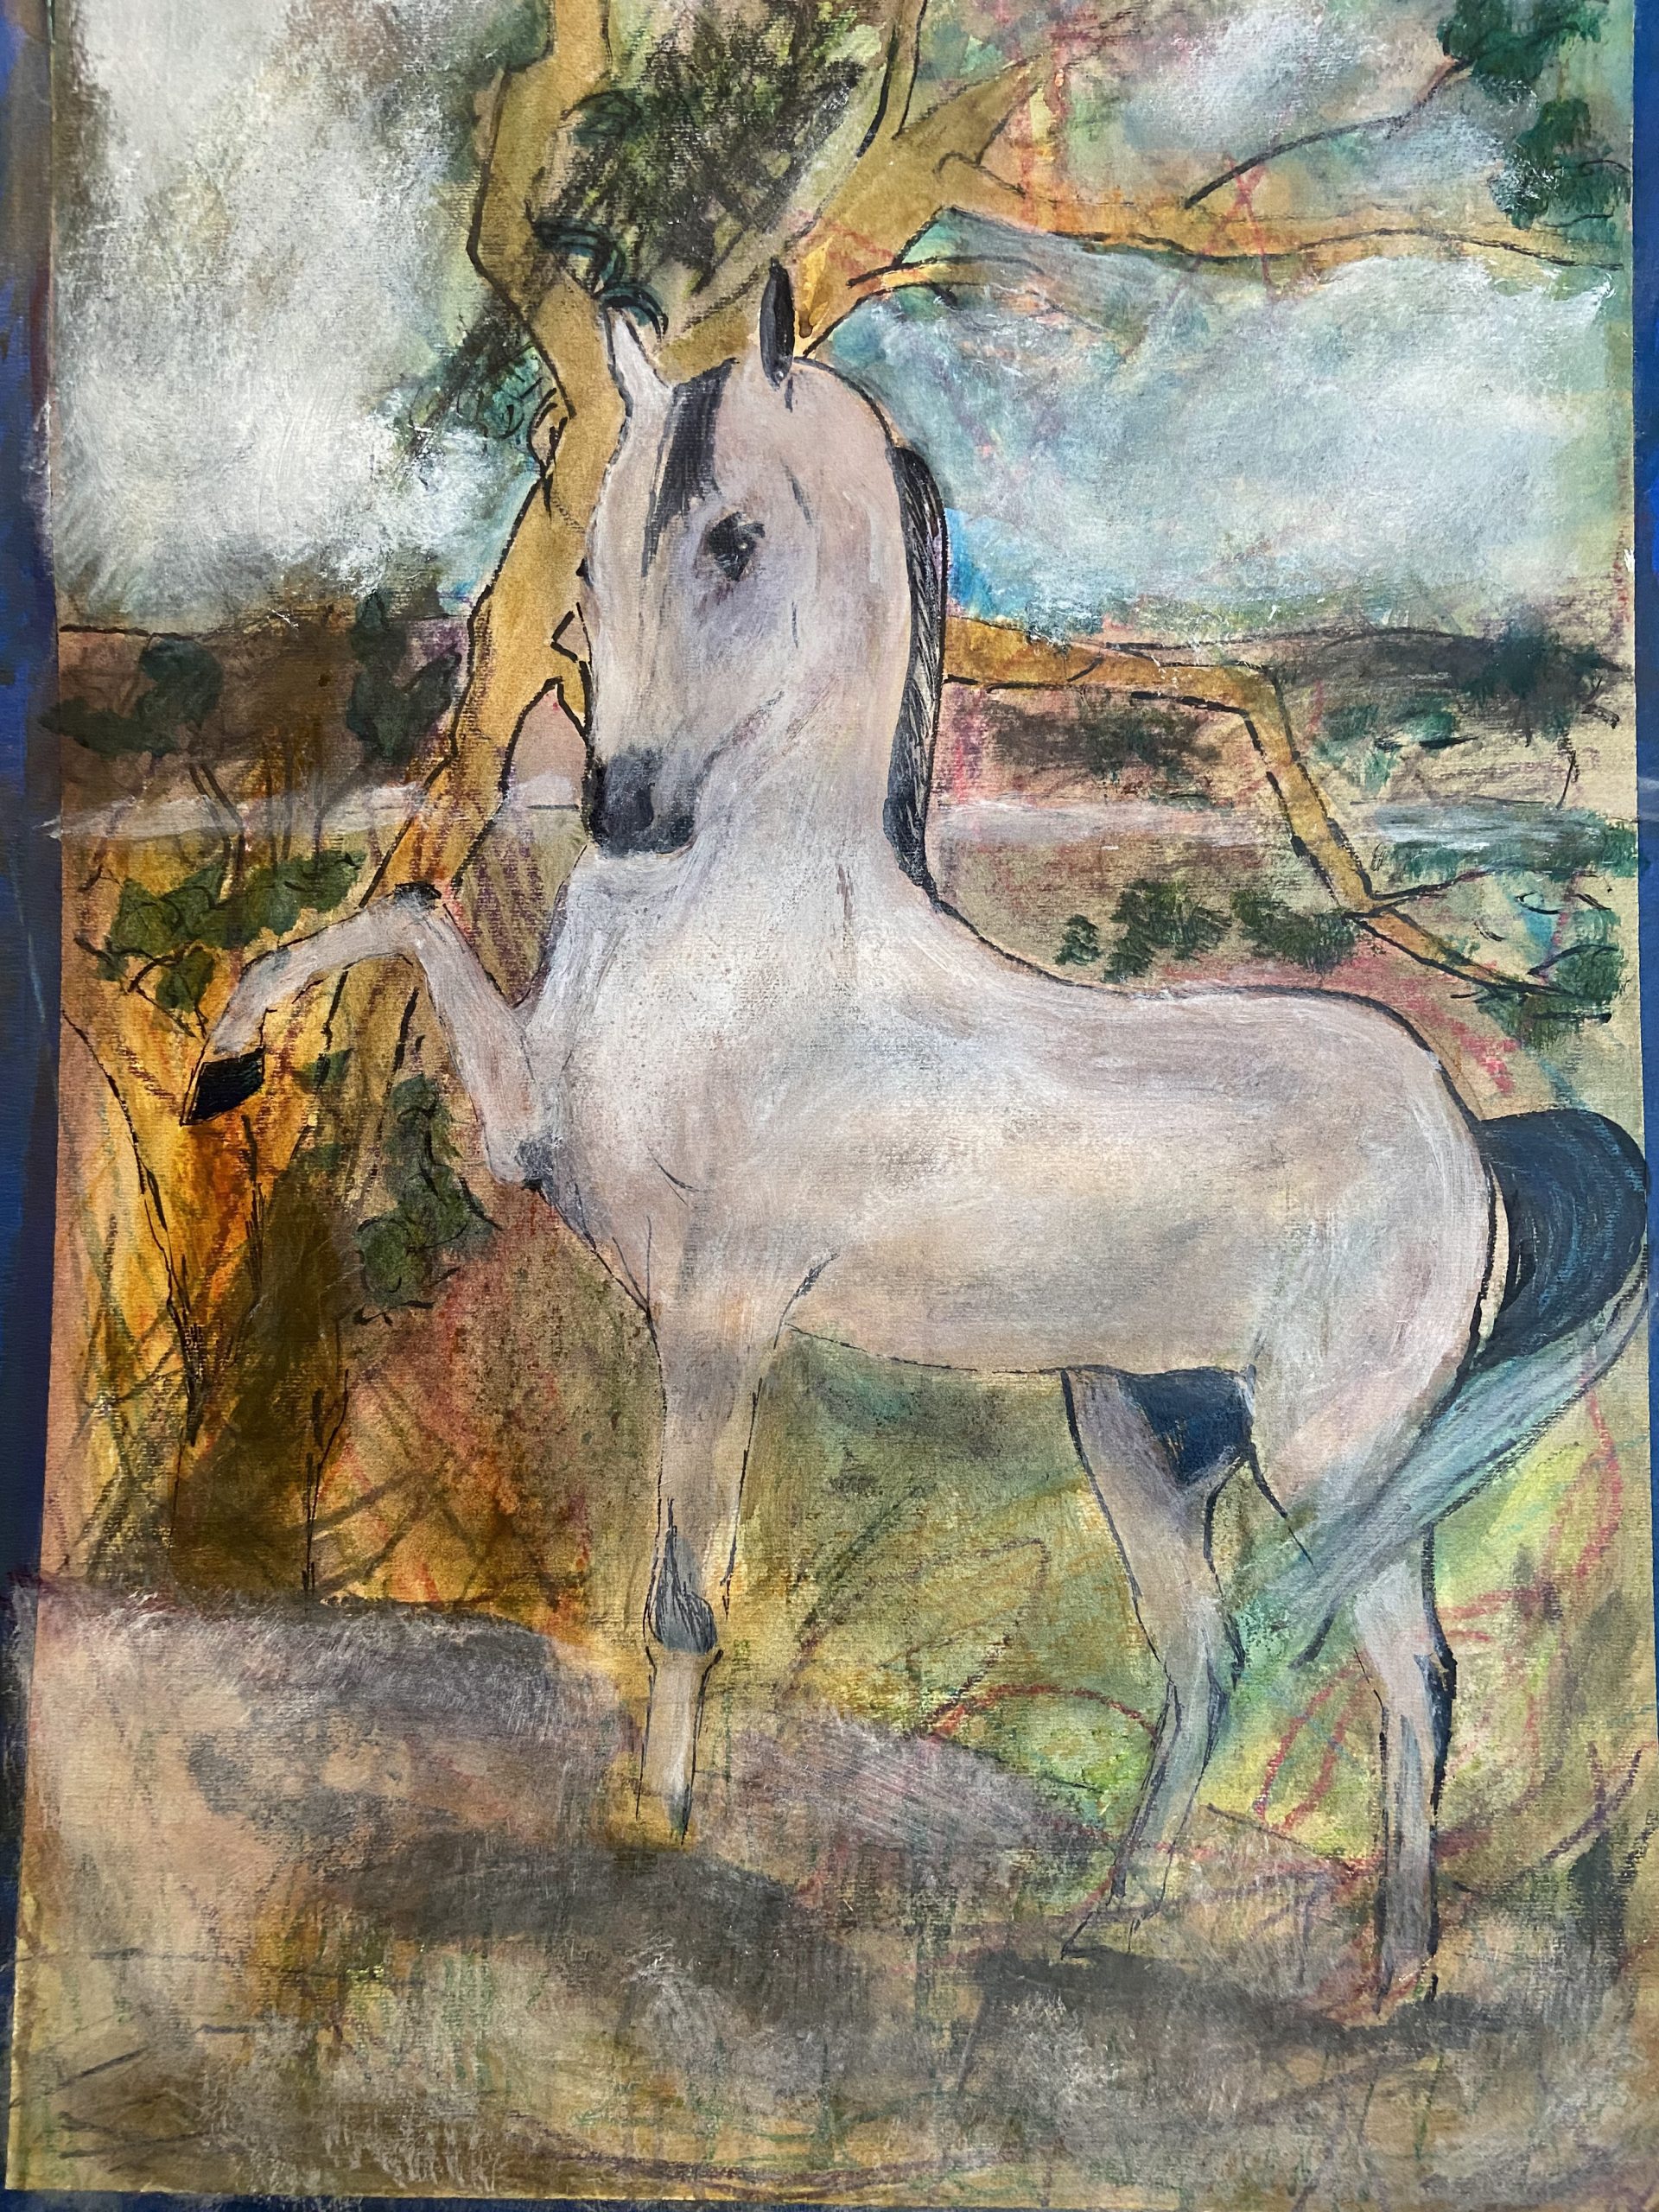 Painting of a horse using scumbling